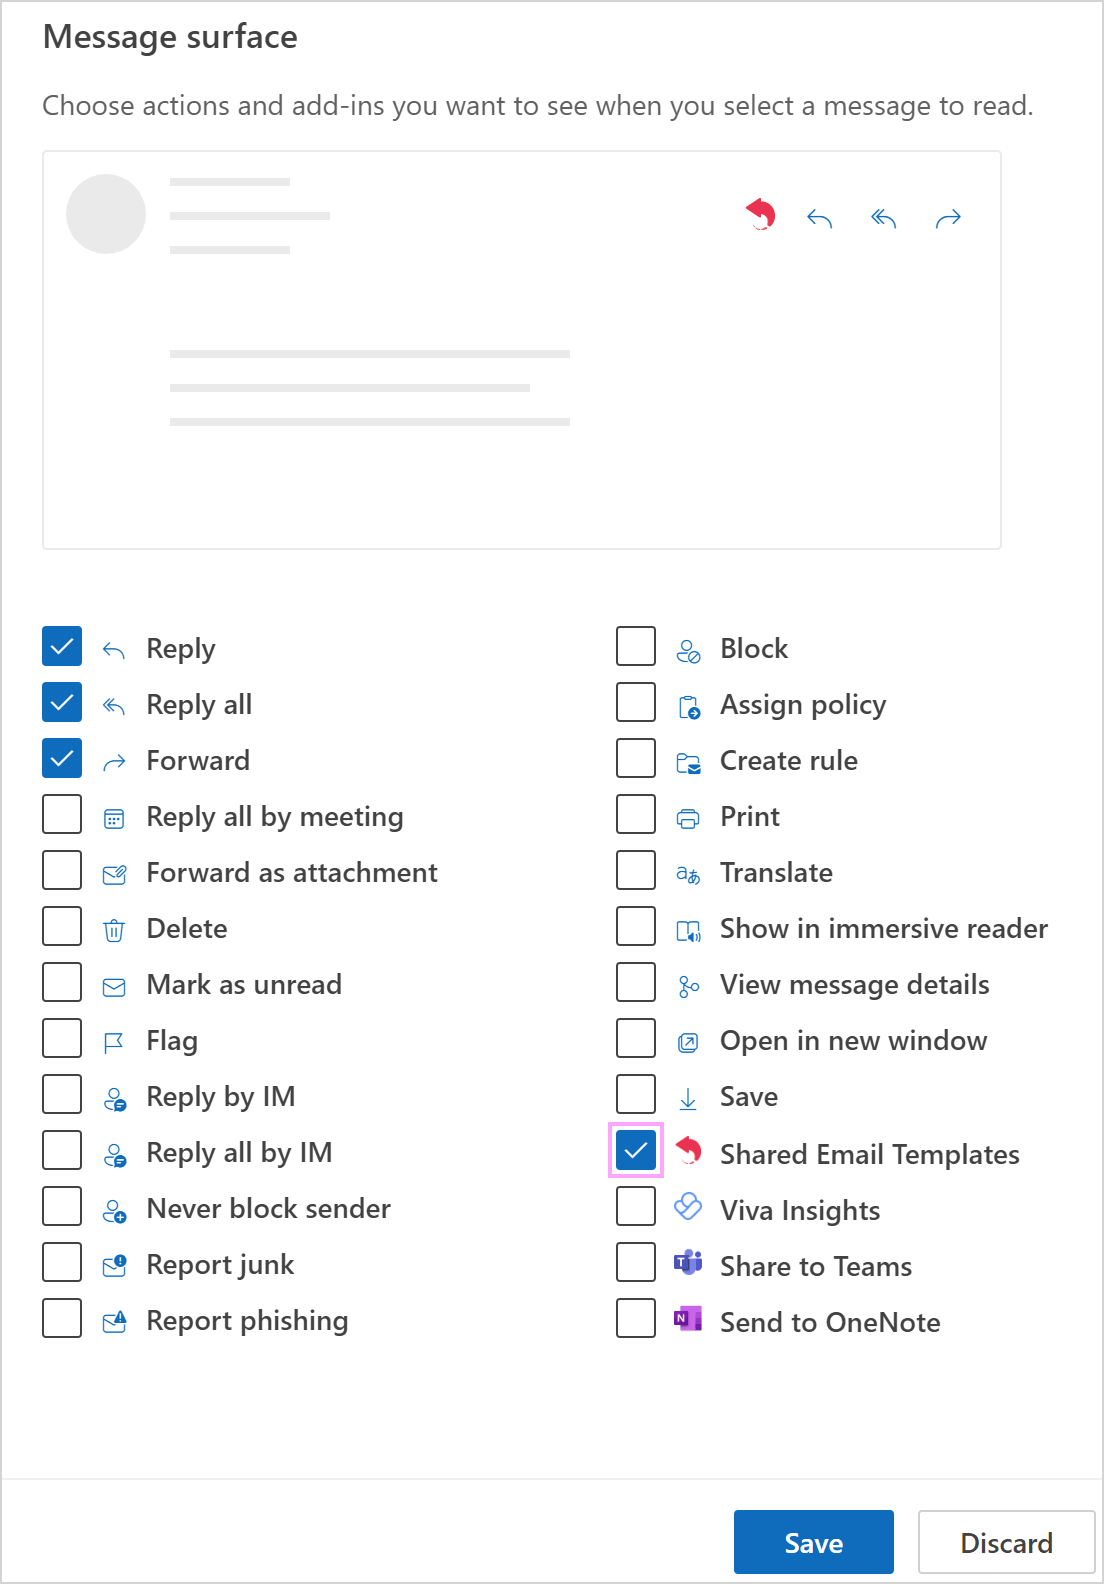 The Shared Email Templates checkbox selected